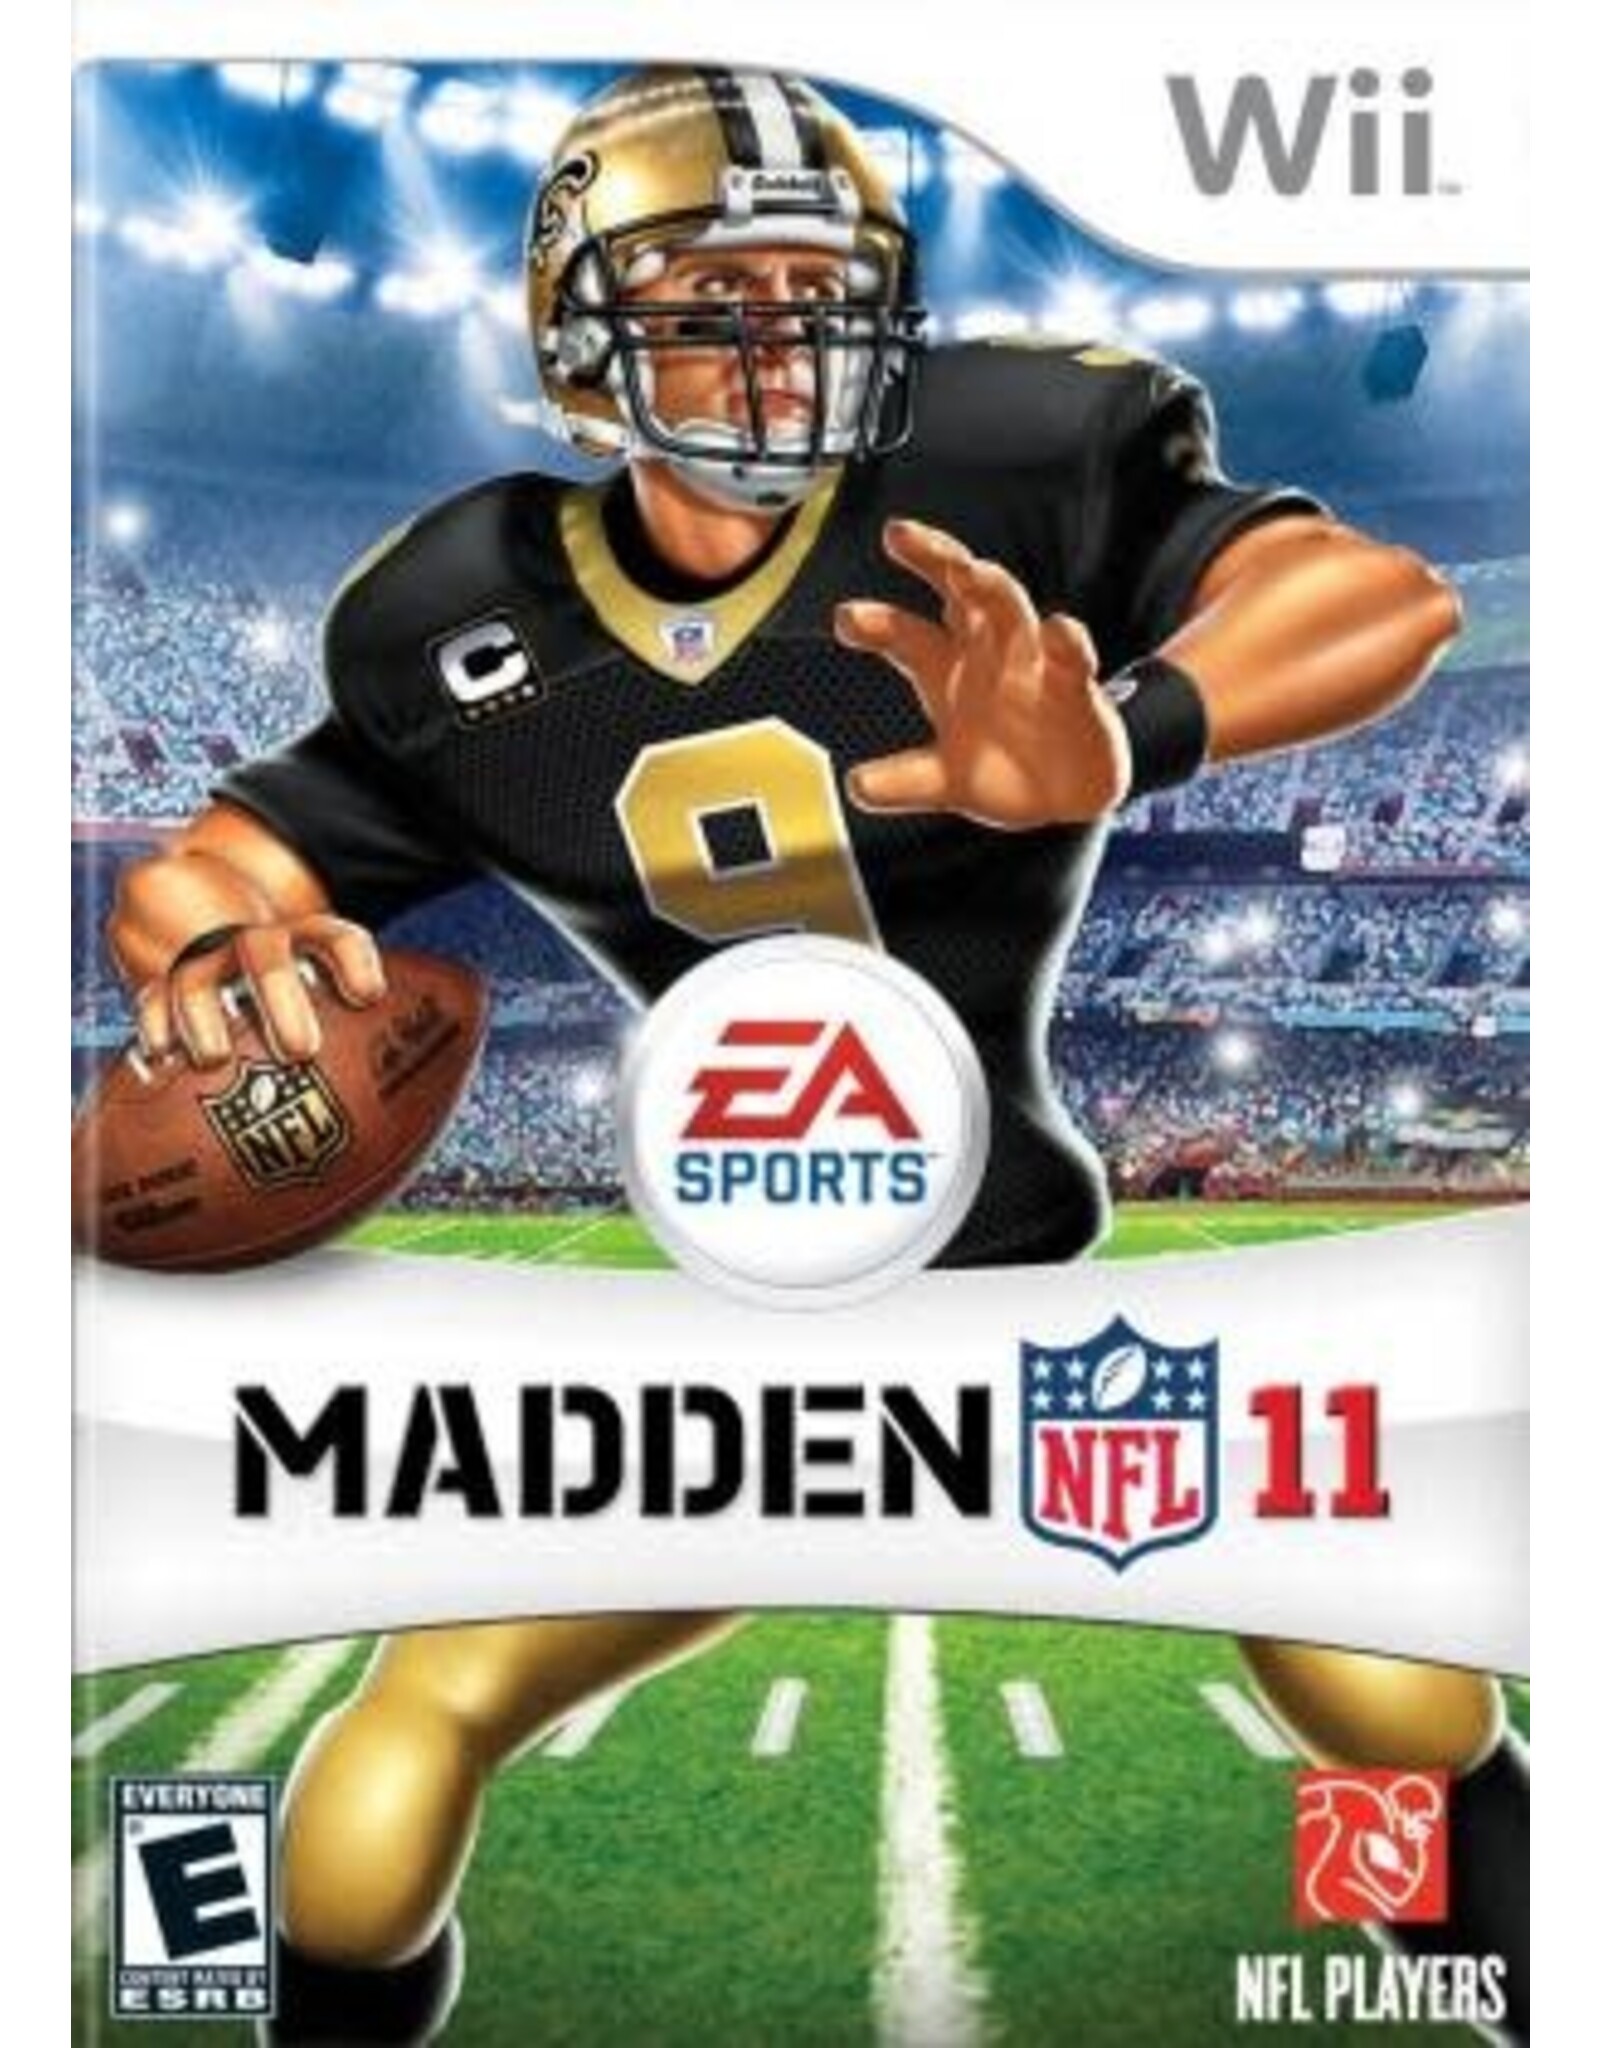 Wii Madden NFL 11 (No Manual)